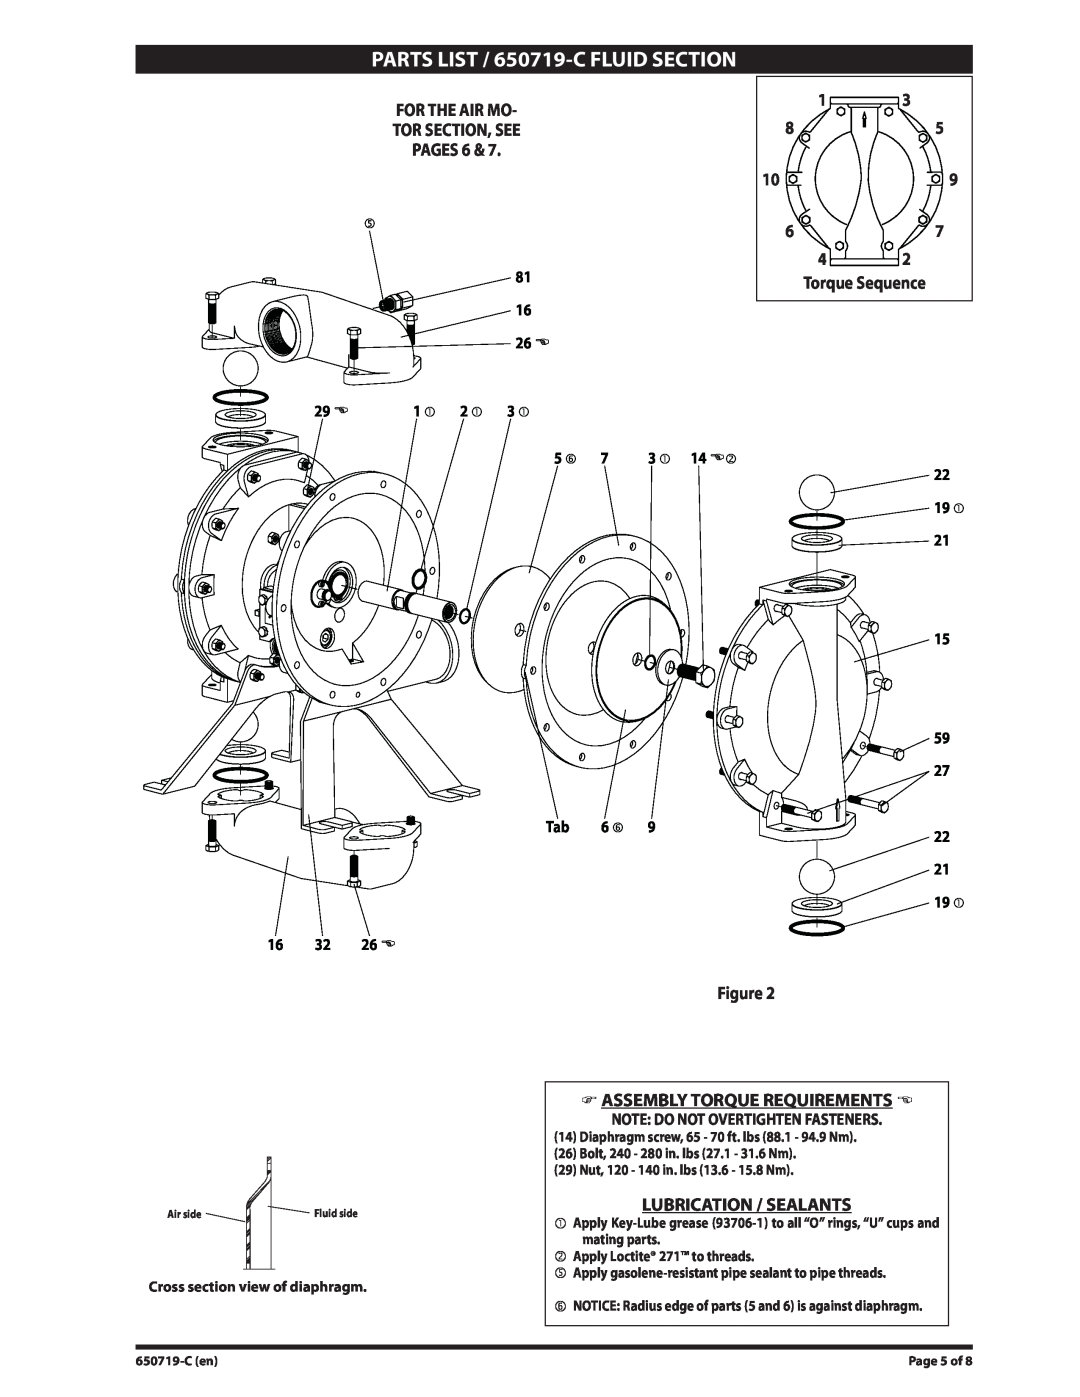 Ingersoll-Rand 650719-C For The Air Mo Tor Section, See Pages, 13 85 109 67 42 Torque Sequence, Lubrication / Sealants 